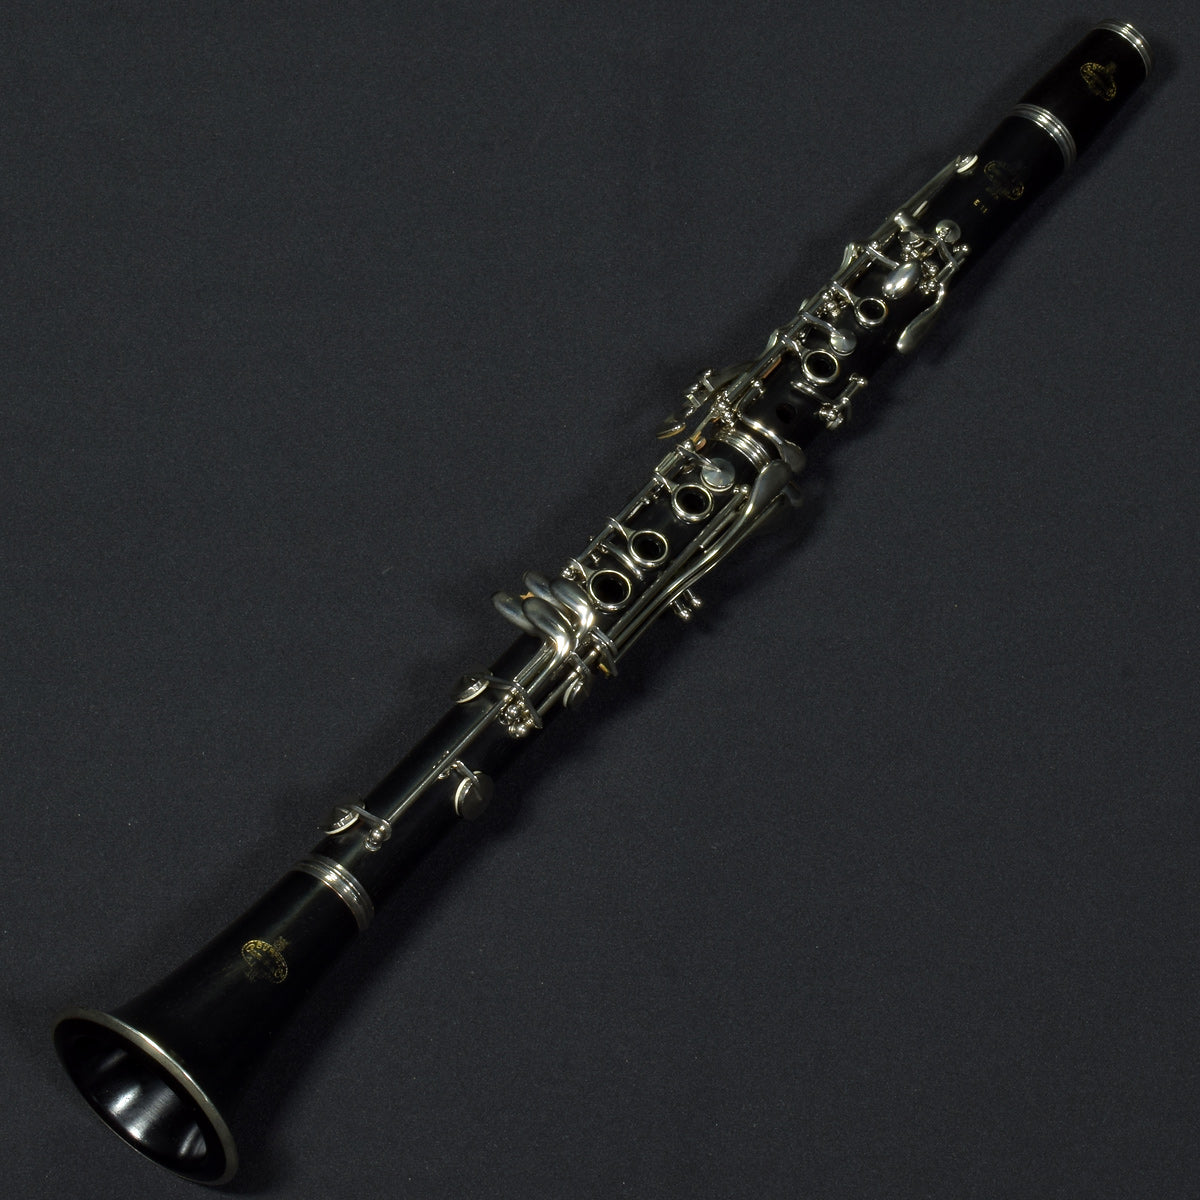 [SN 366575] USED Buffet Crampon Crampon / E11 SP B-flat Clarinet, Finger rest fixed type [20]